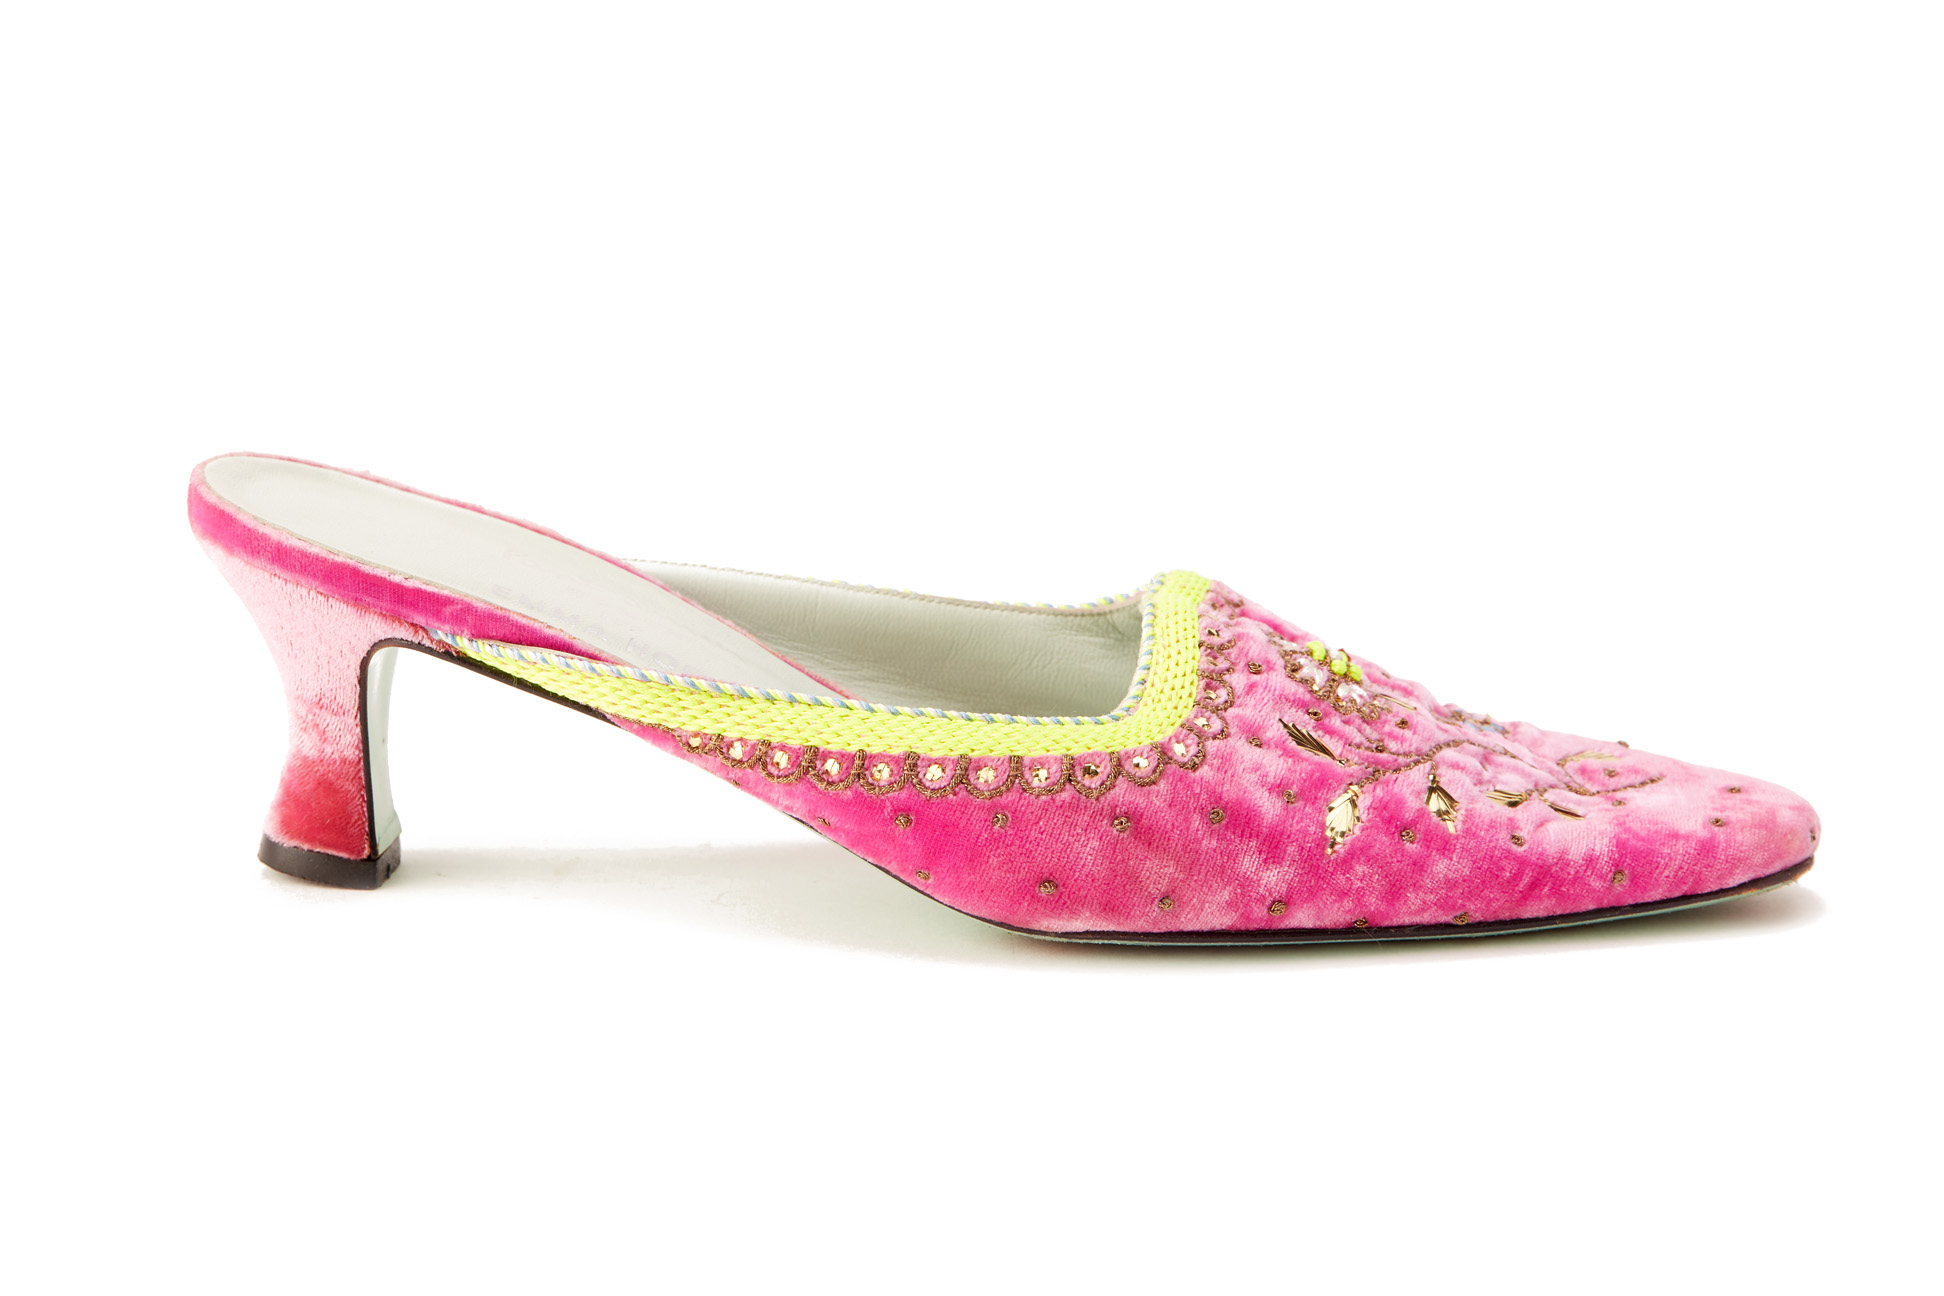 A PAIR OF PAUL SMITH PINK SUEDE EMBELLISHED HEELS EU 39.5 - Image 2 of 3